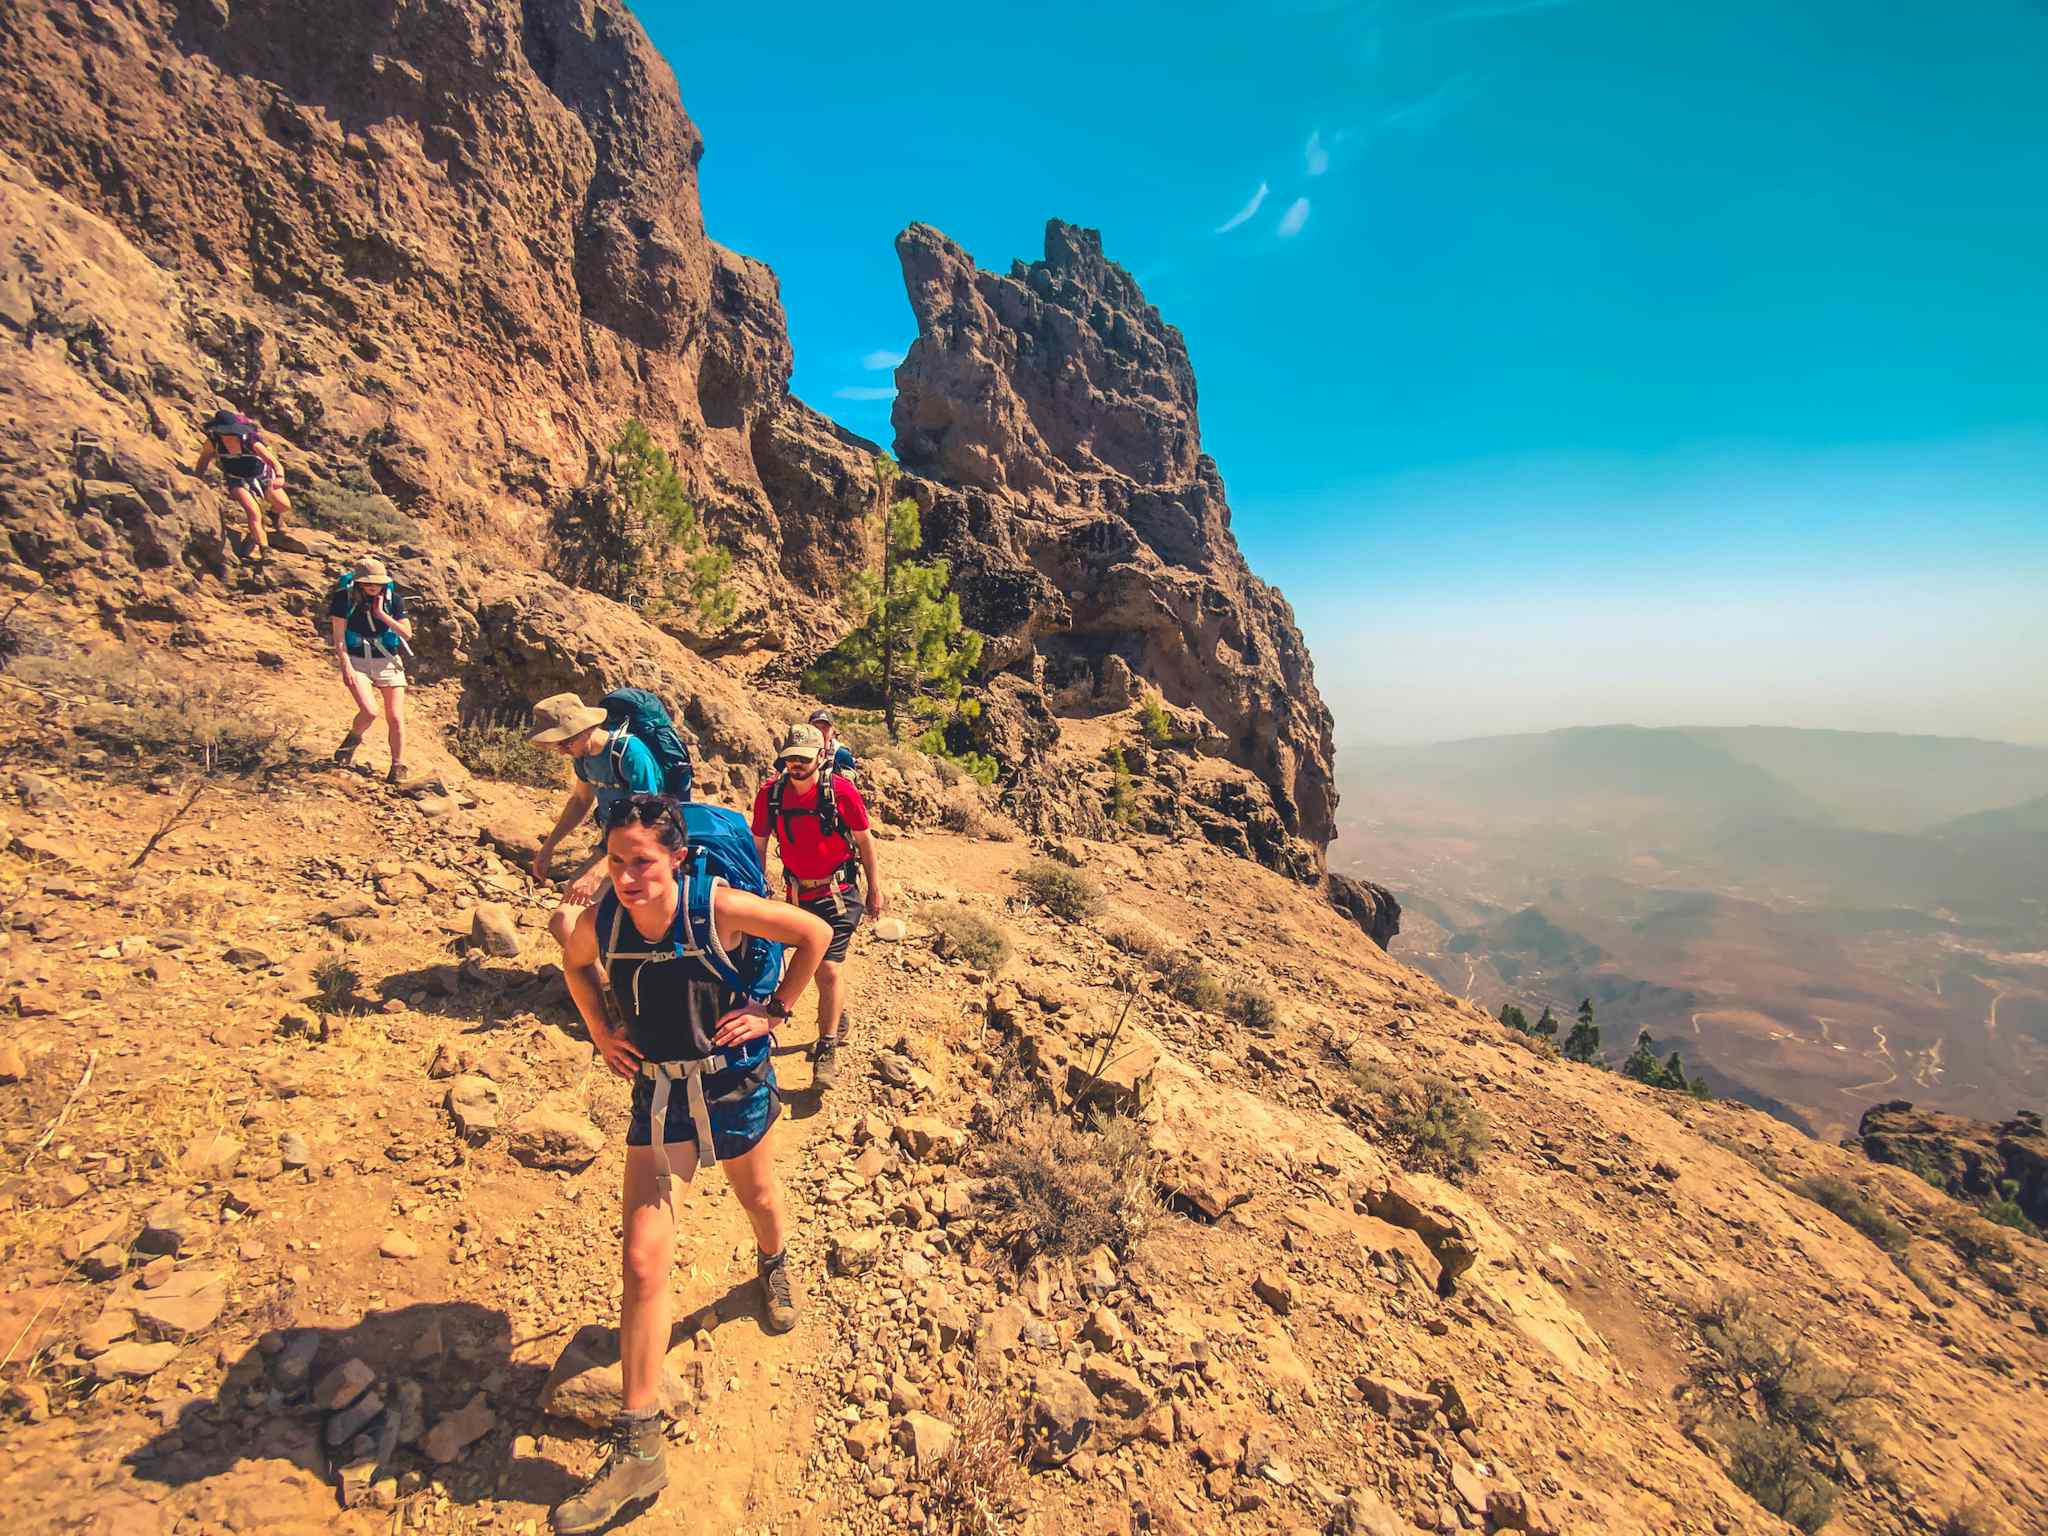 Hikers tackling a dusty trail in Gran Canaria, backed by rocks and blue skies.